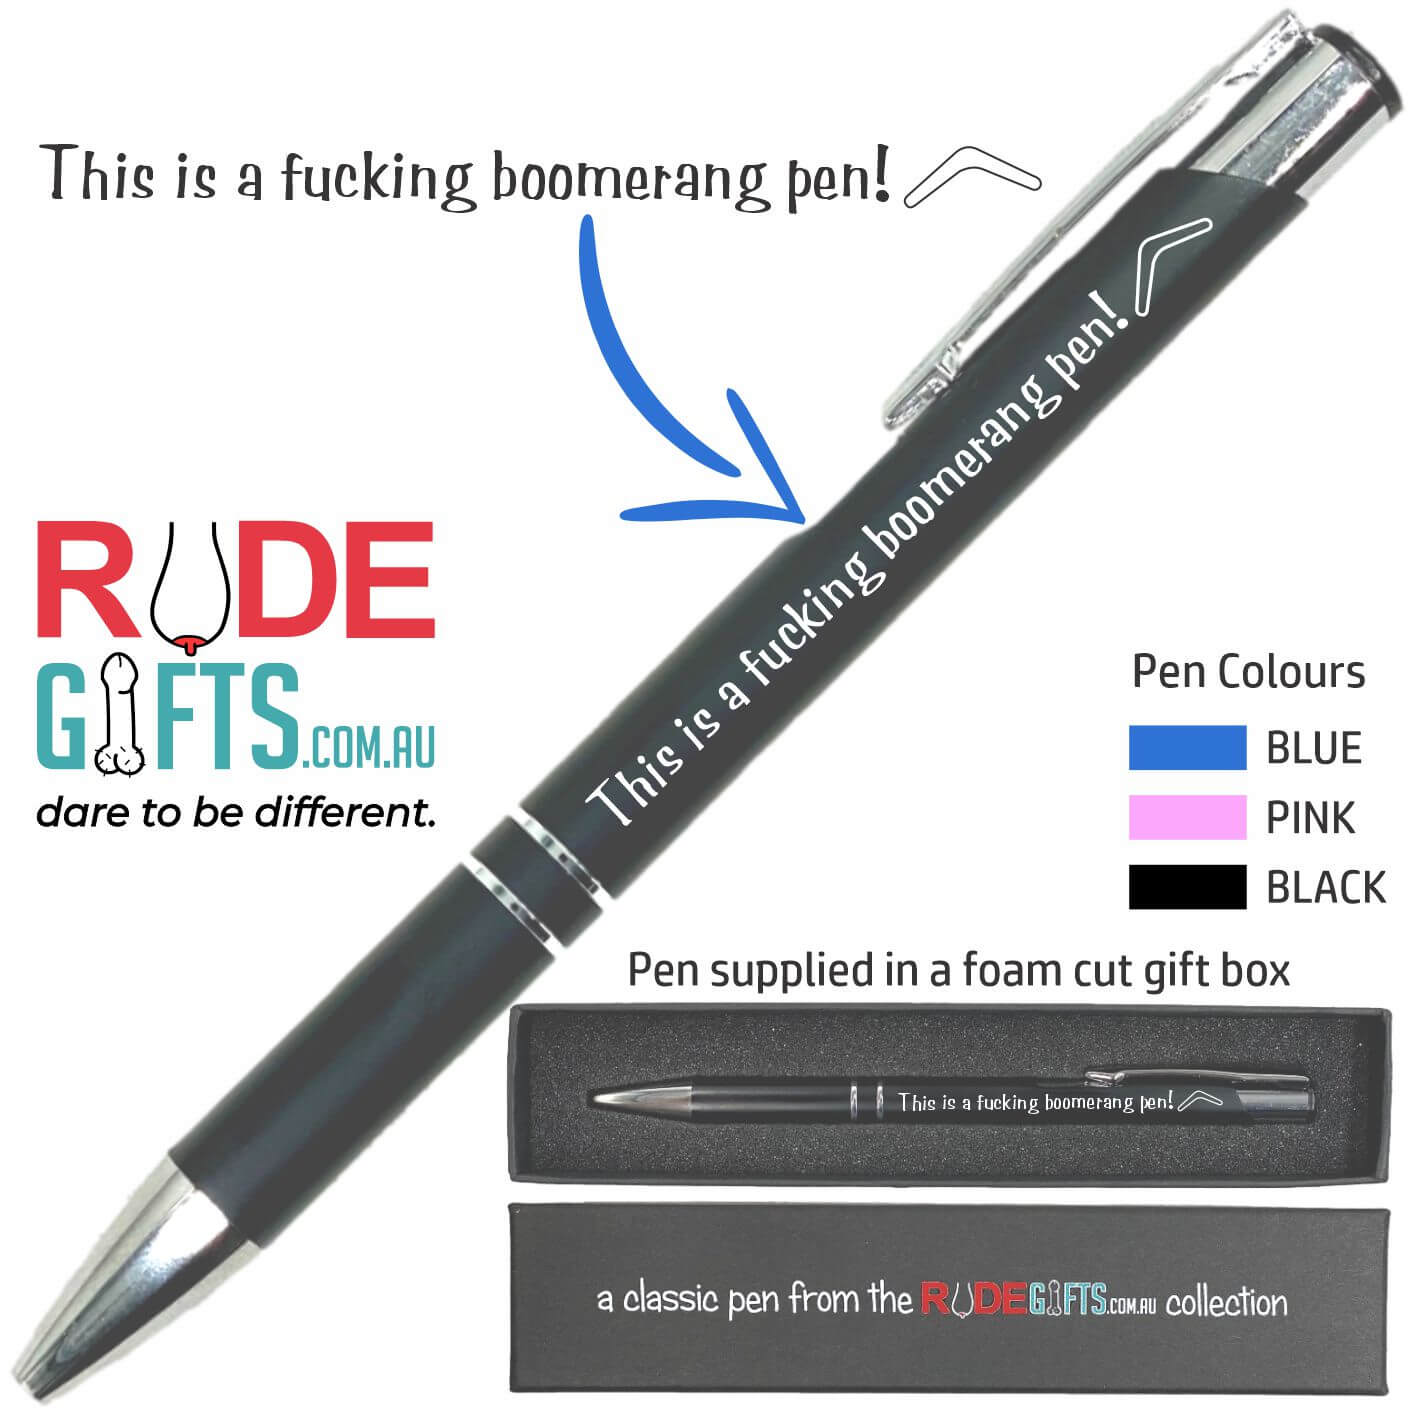 This is a fucking boomerang pen!